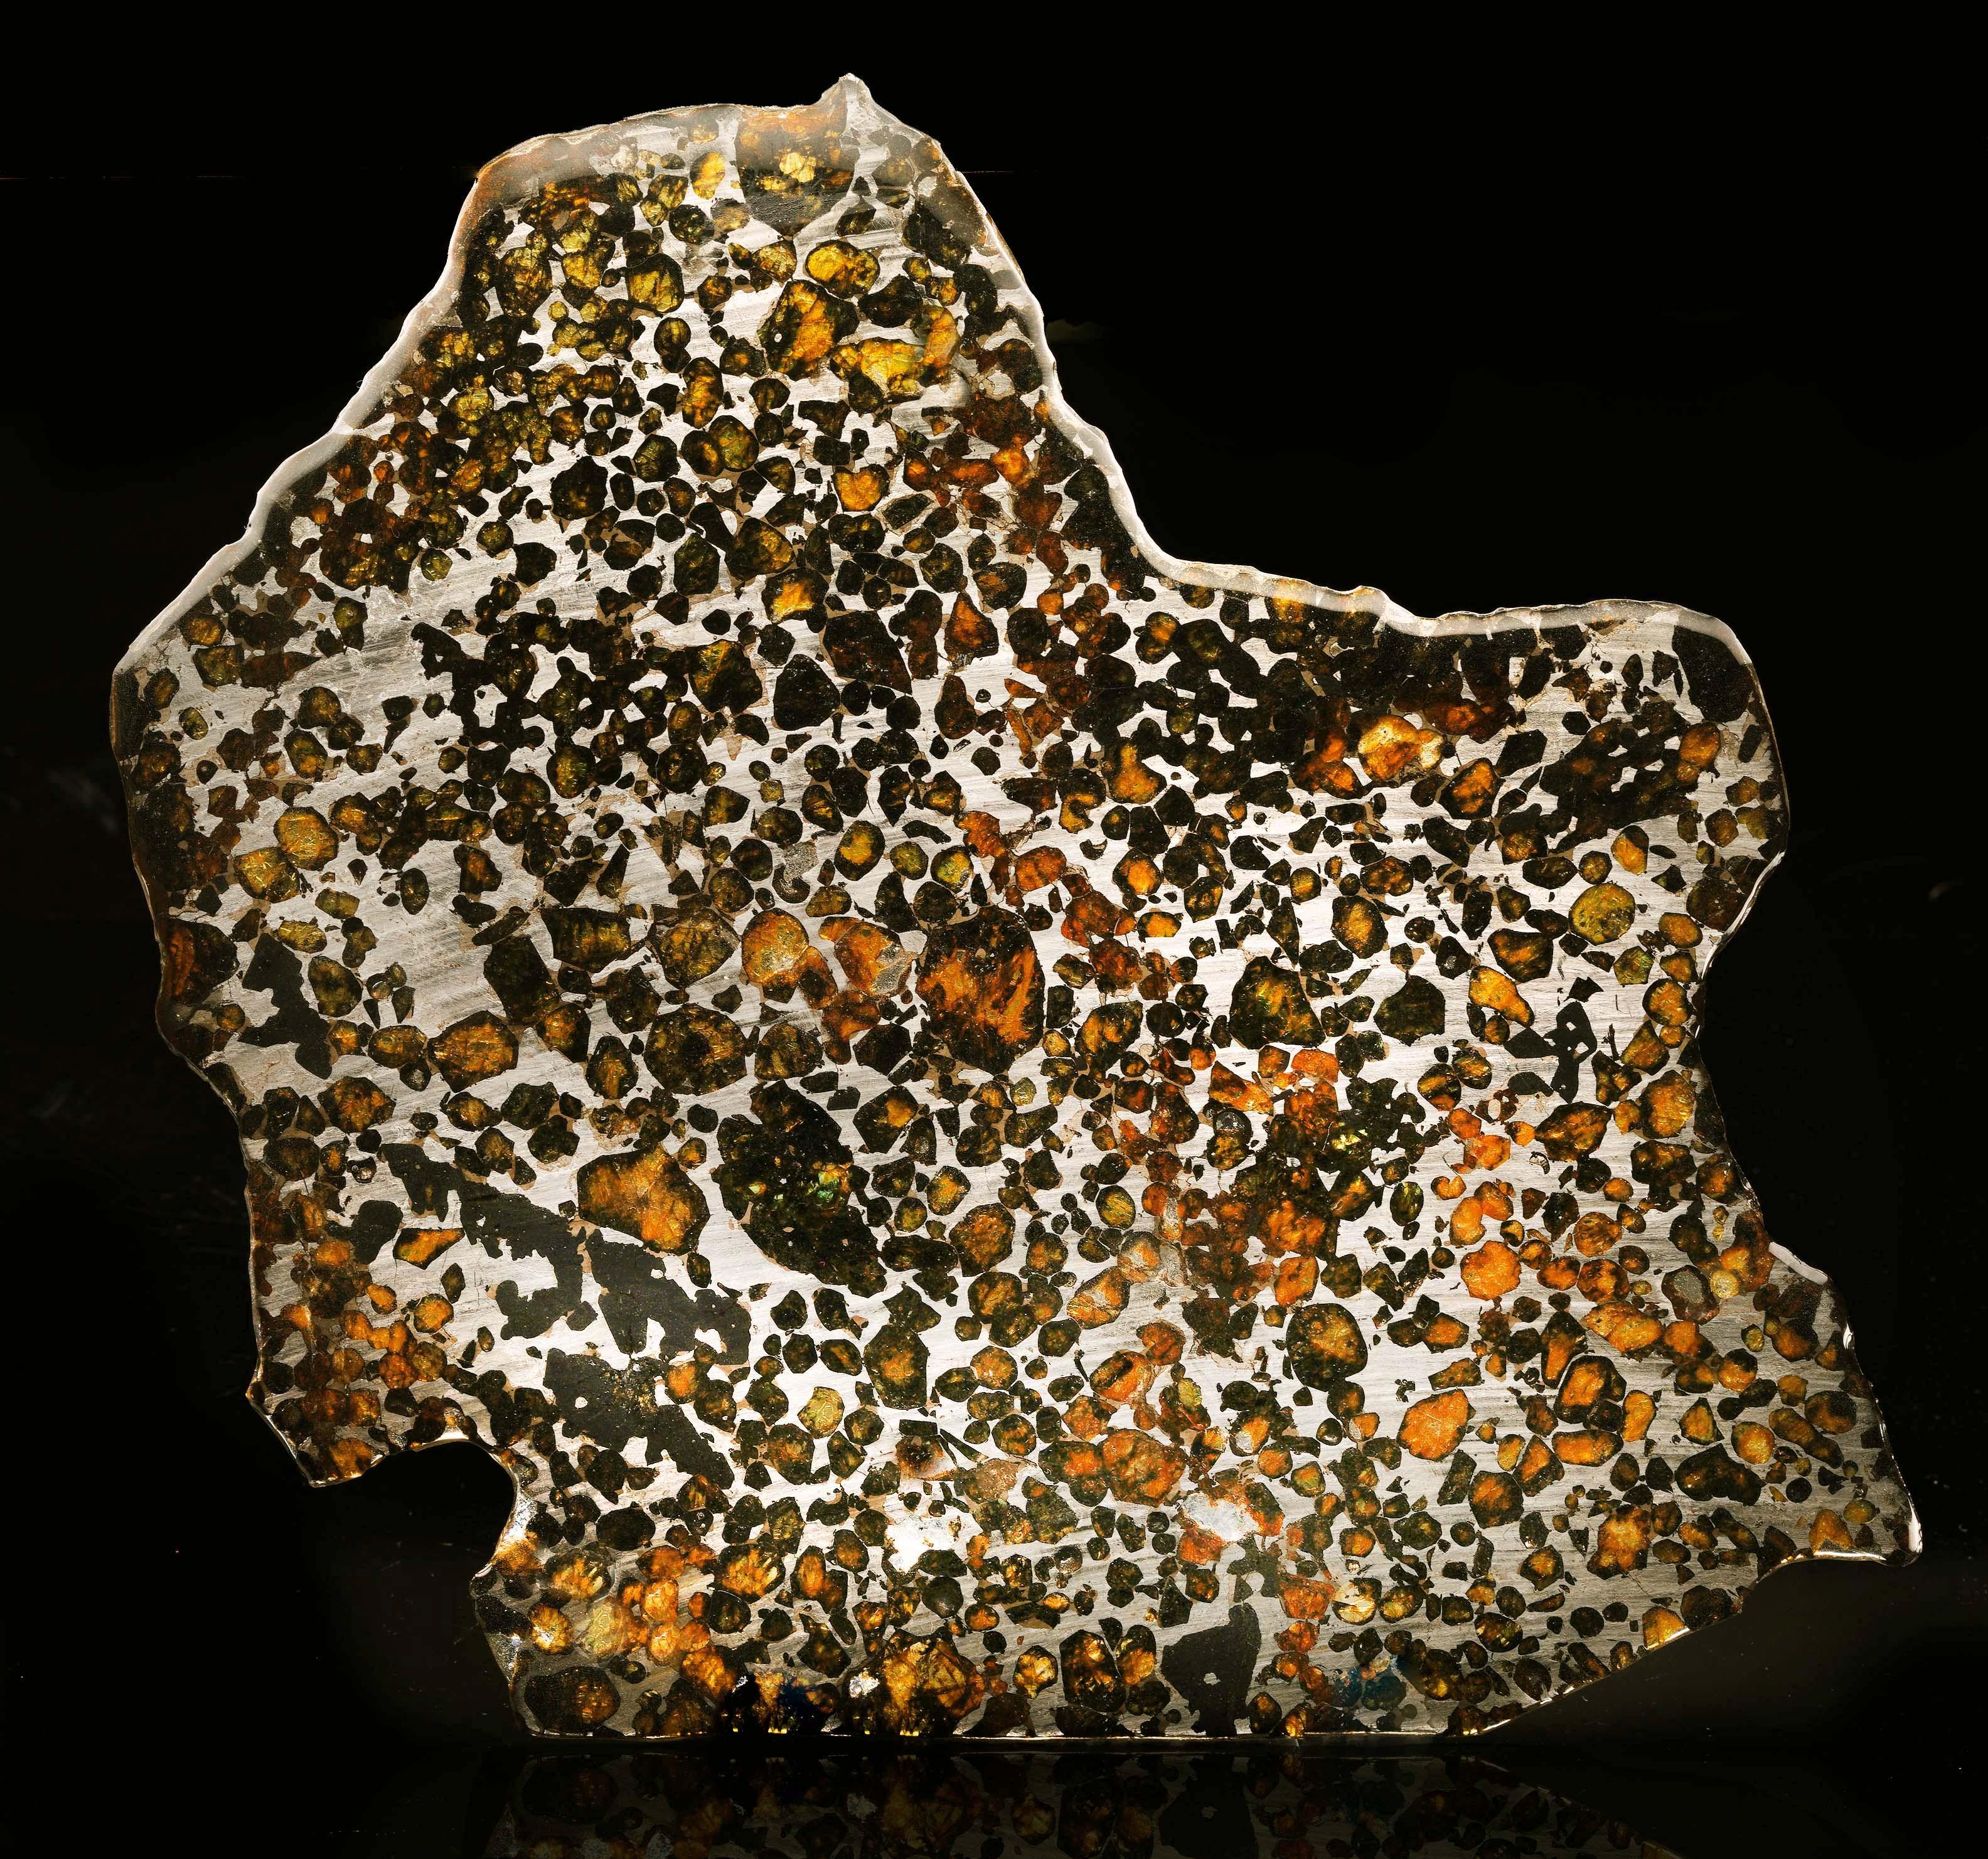 This luminous 478 gram Sericho pallasite meteorite slice dates back approximately 4.5 billion years and was discovered in Kenya. The stony-iron meteorites were first identified as such in 2016; the shower is thought to have occurred decades ago,